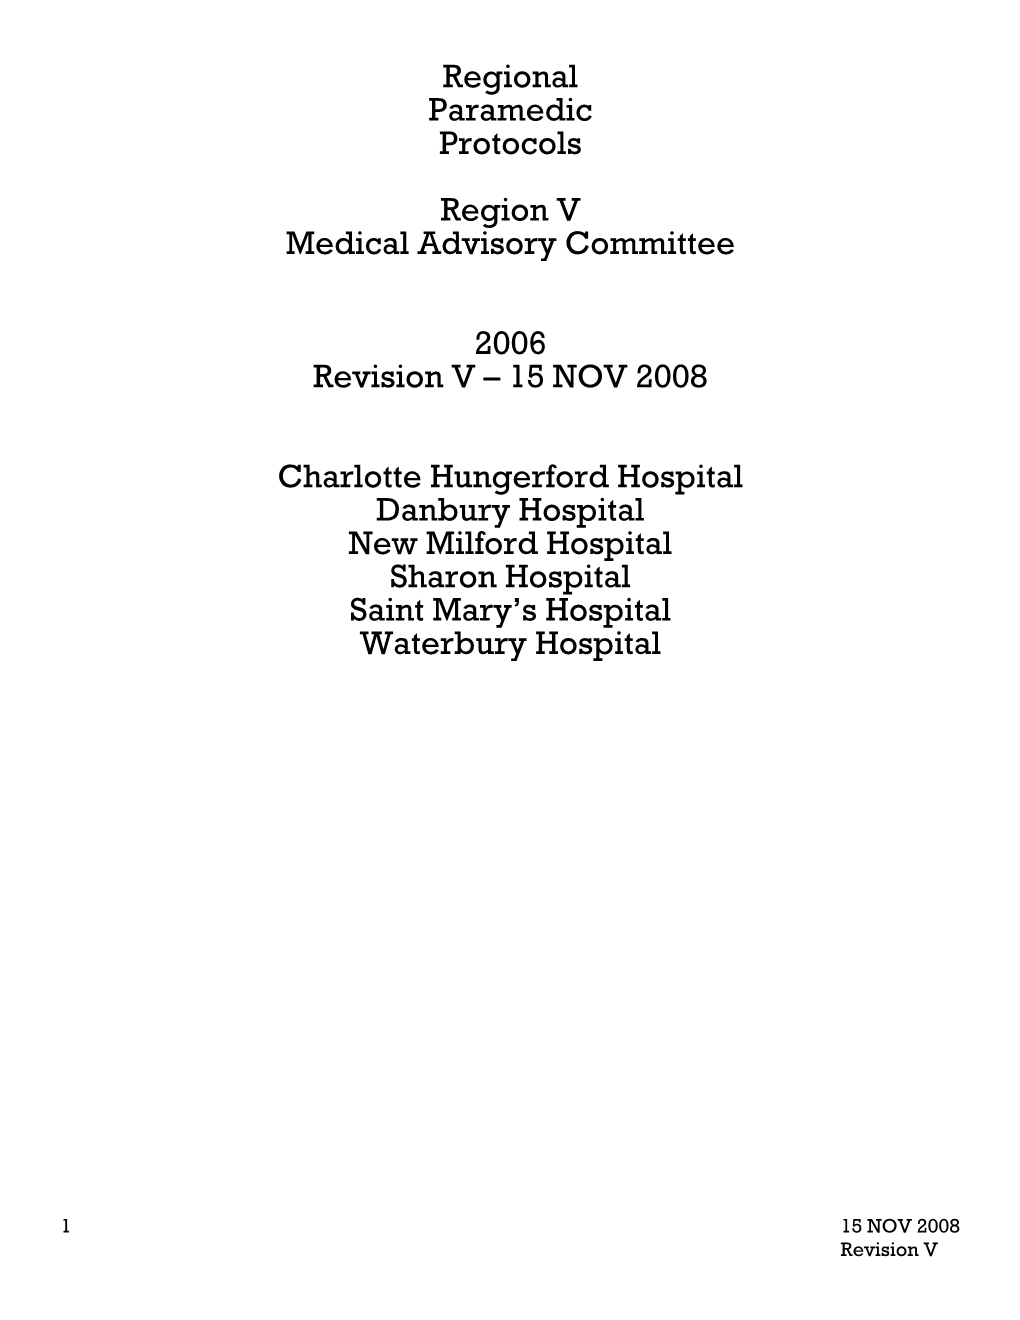 Region V Paramedic Protocols Have Undergone Extensive Changes in This Fifth Revision